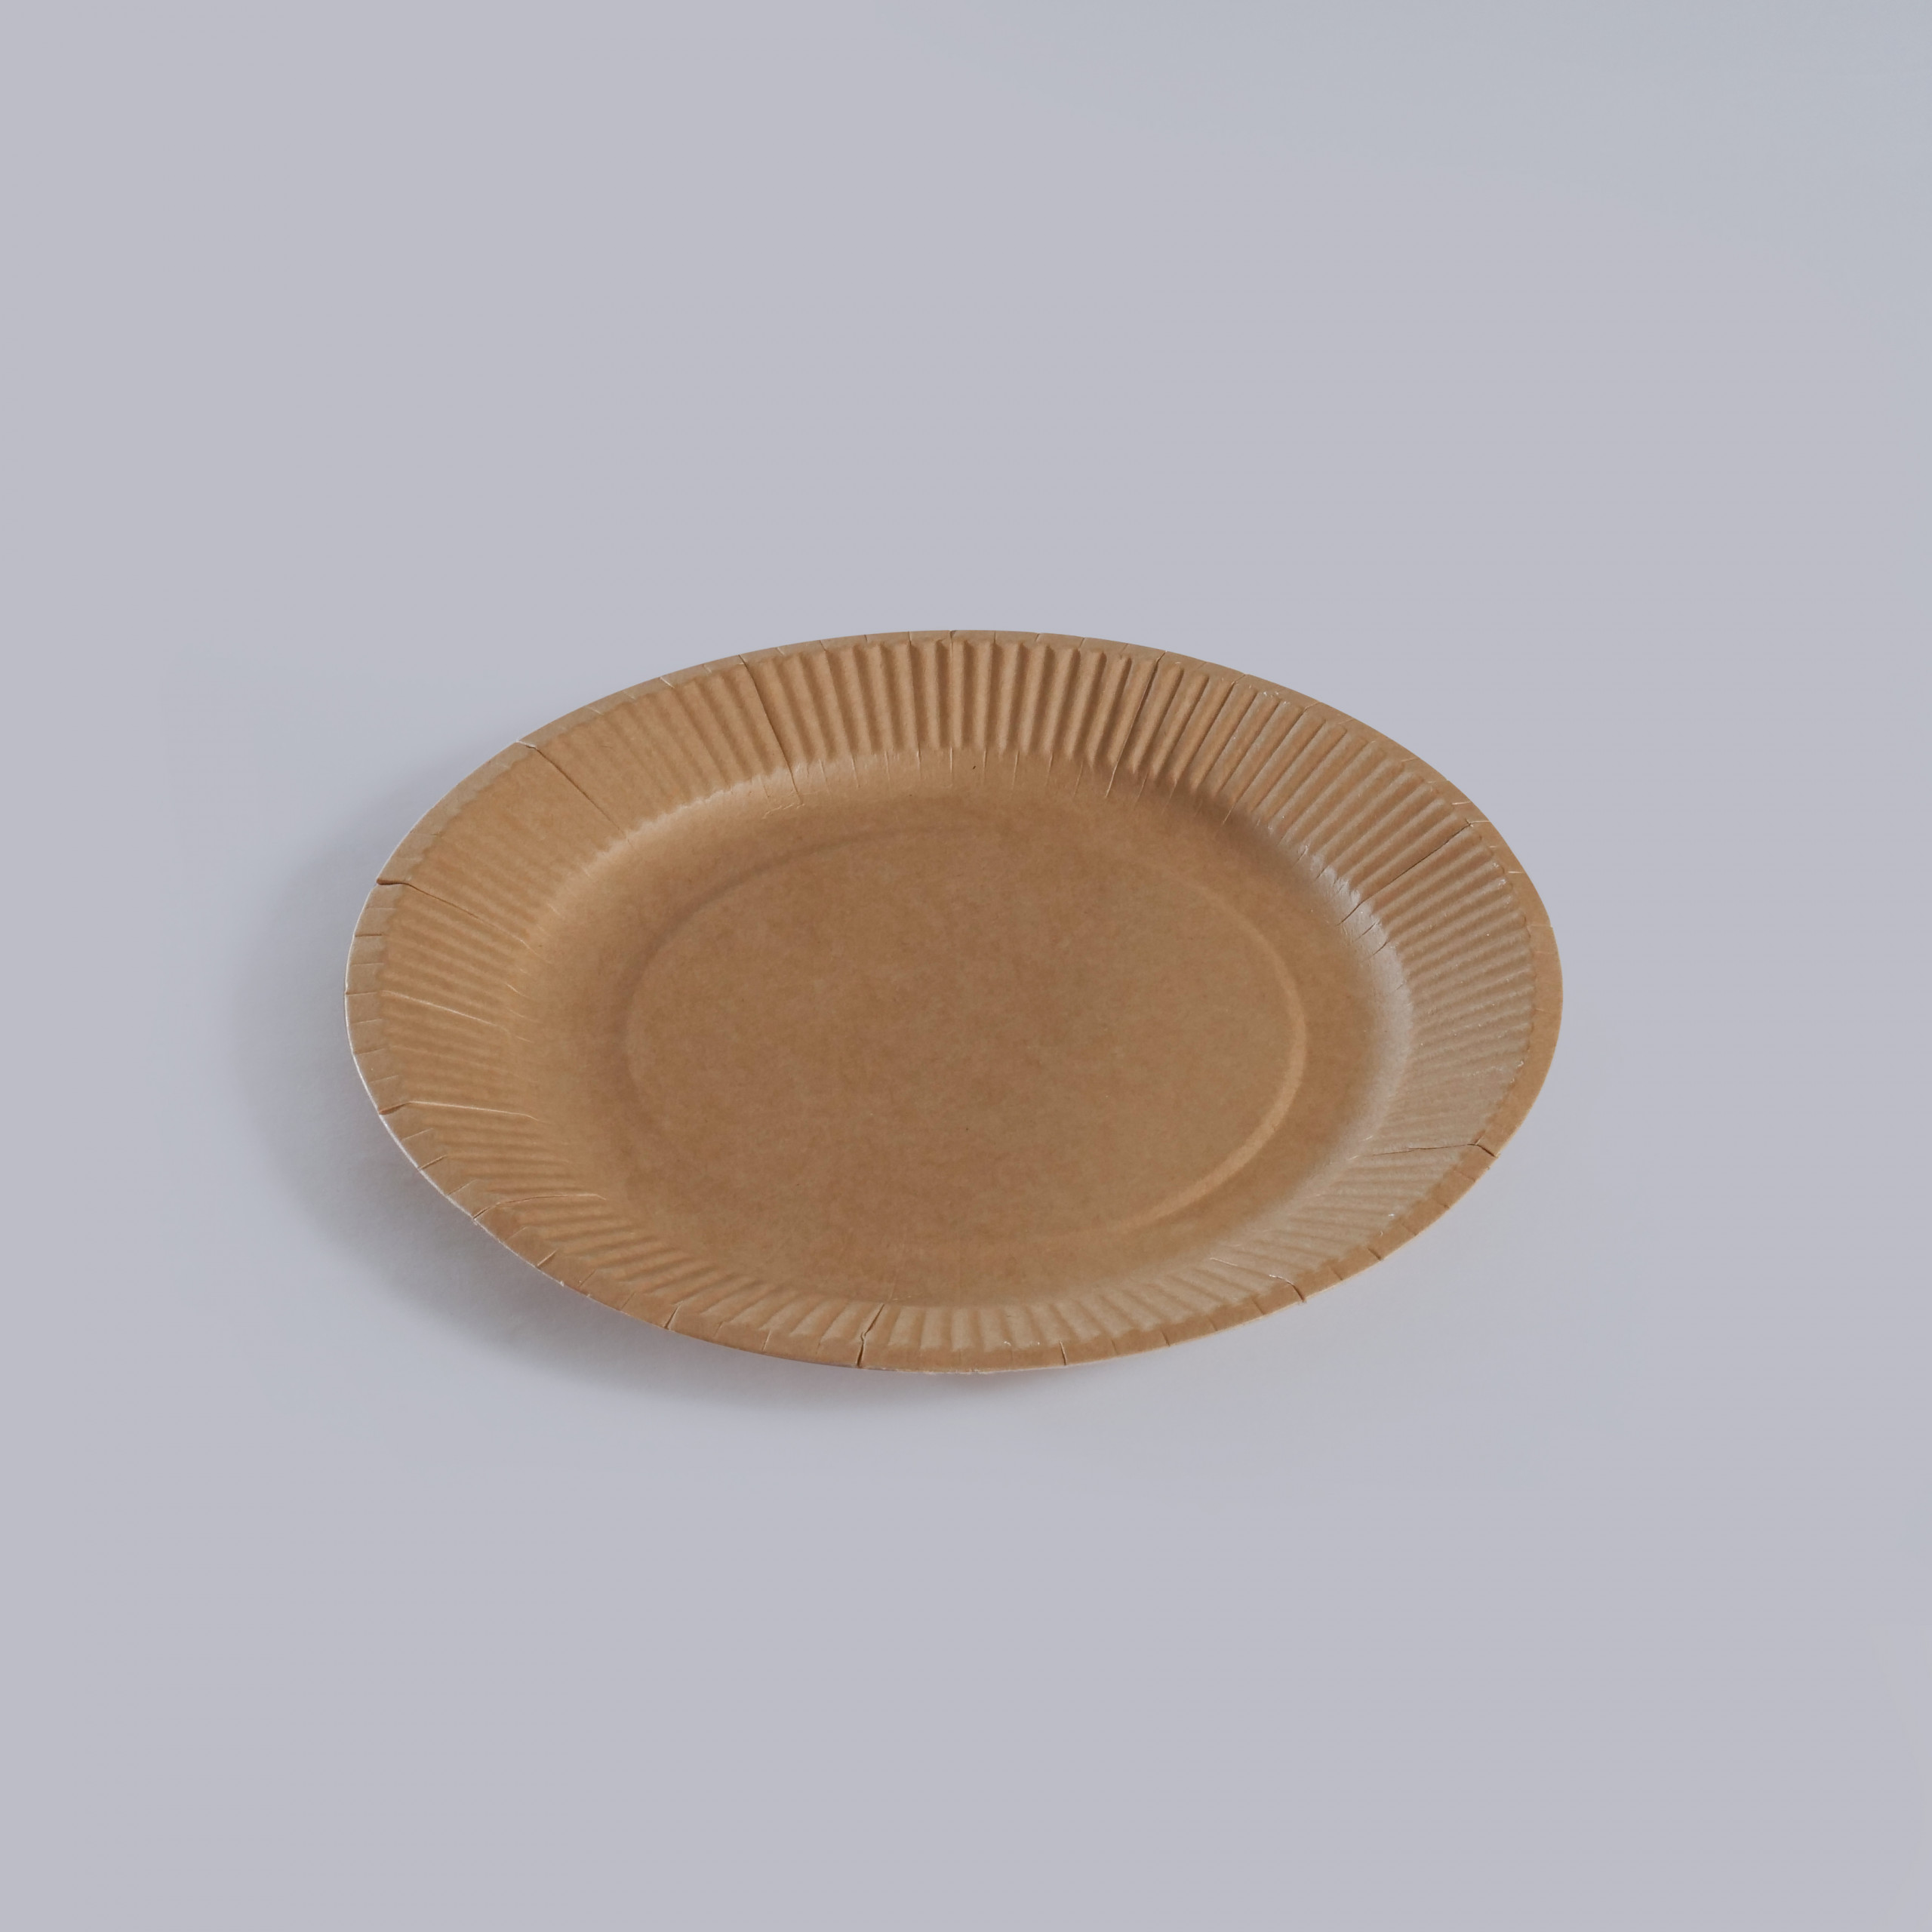 Printed Eco Friendly Disposable Plate